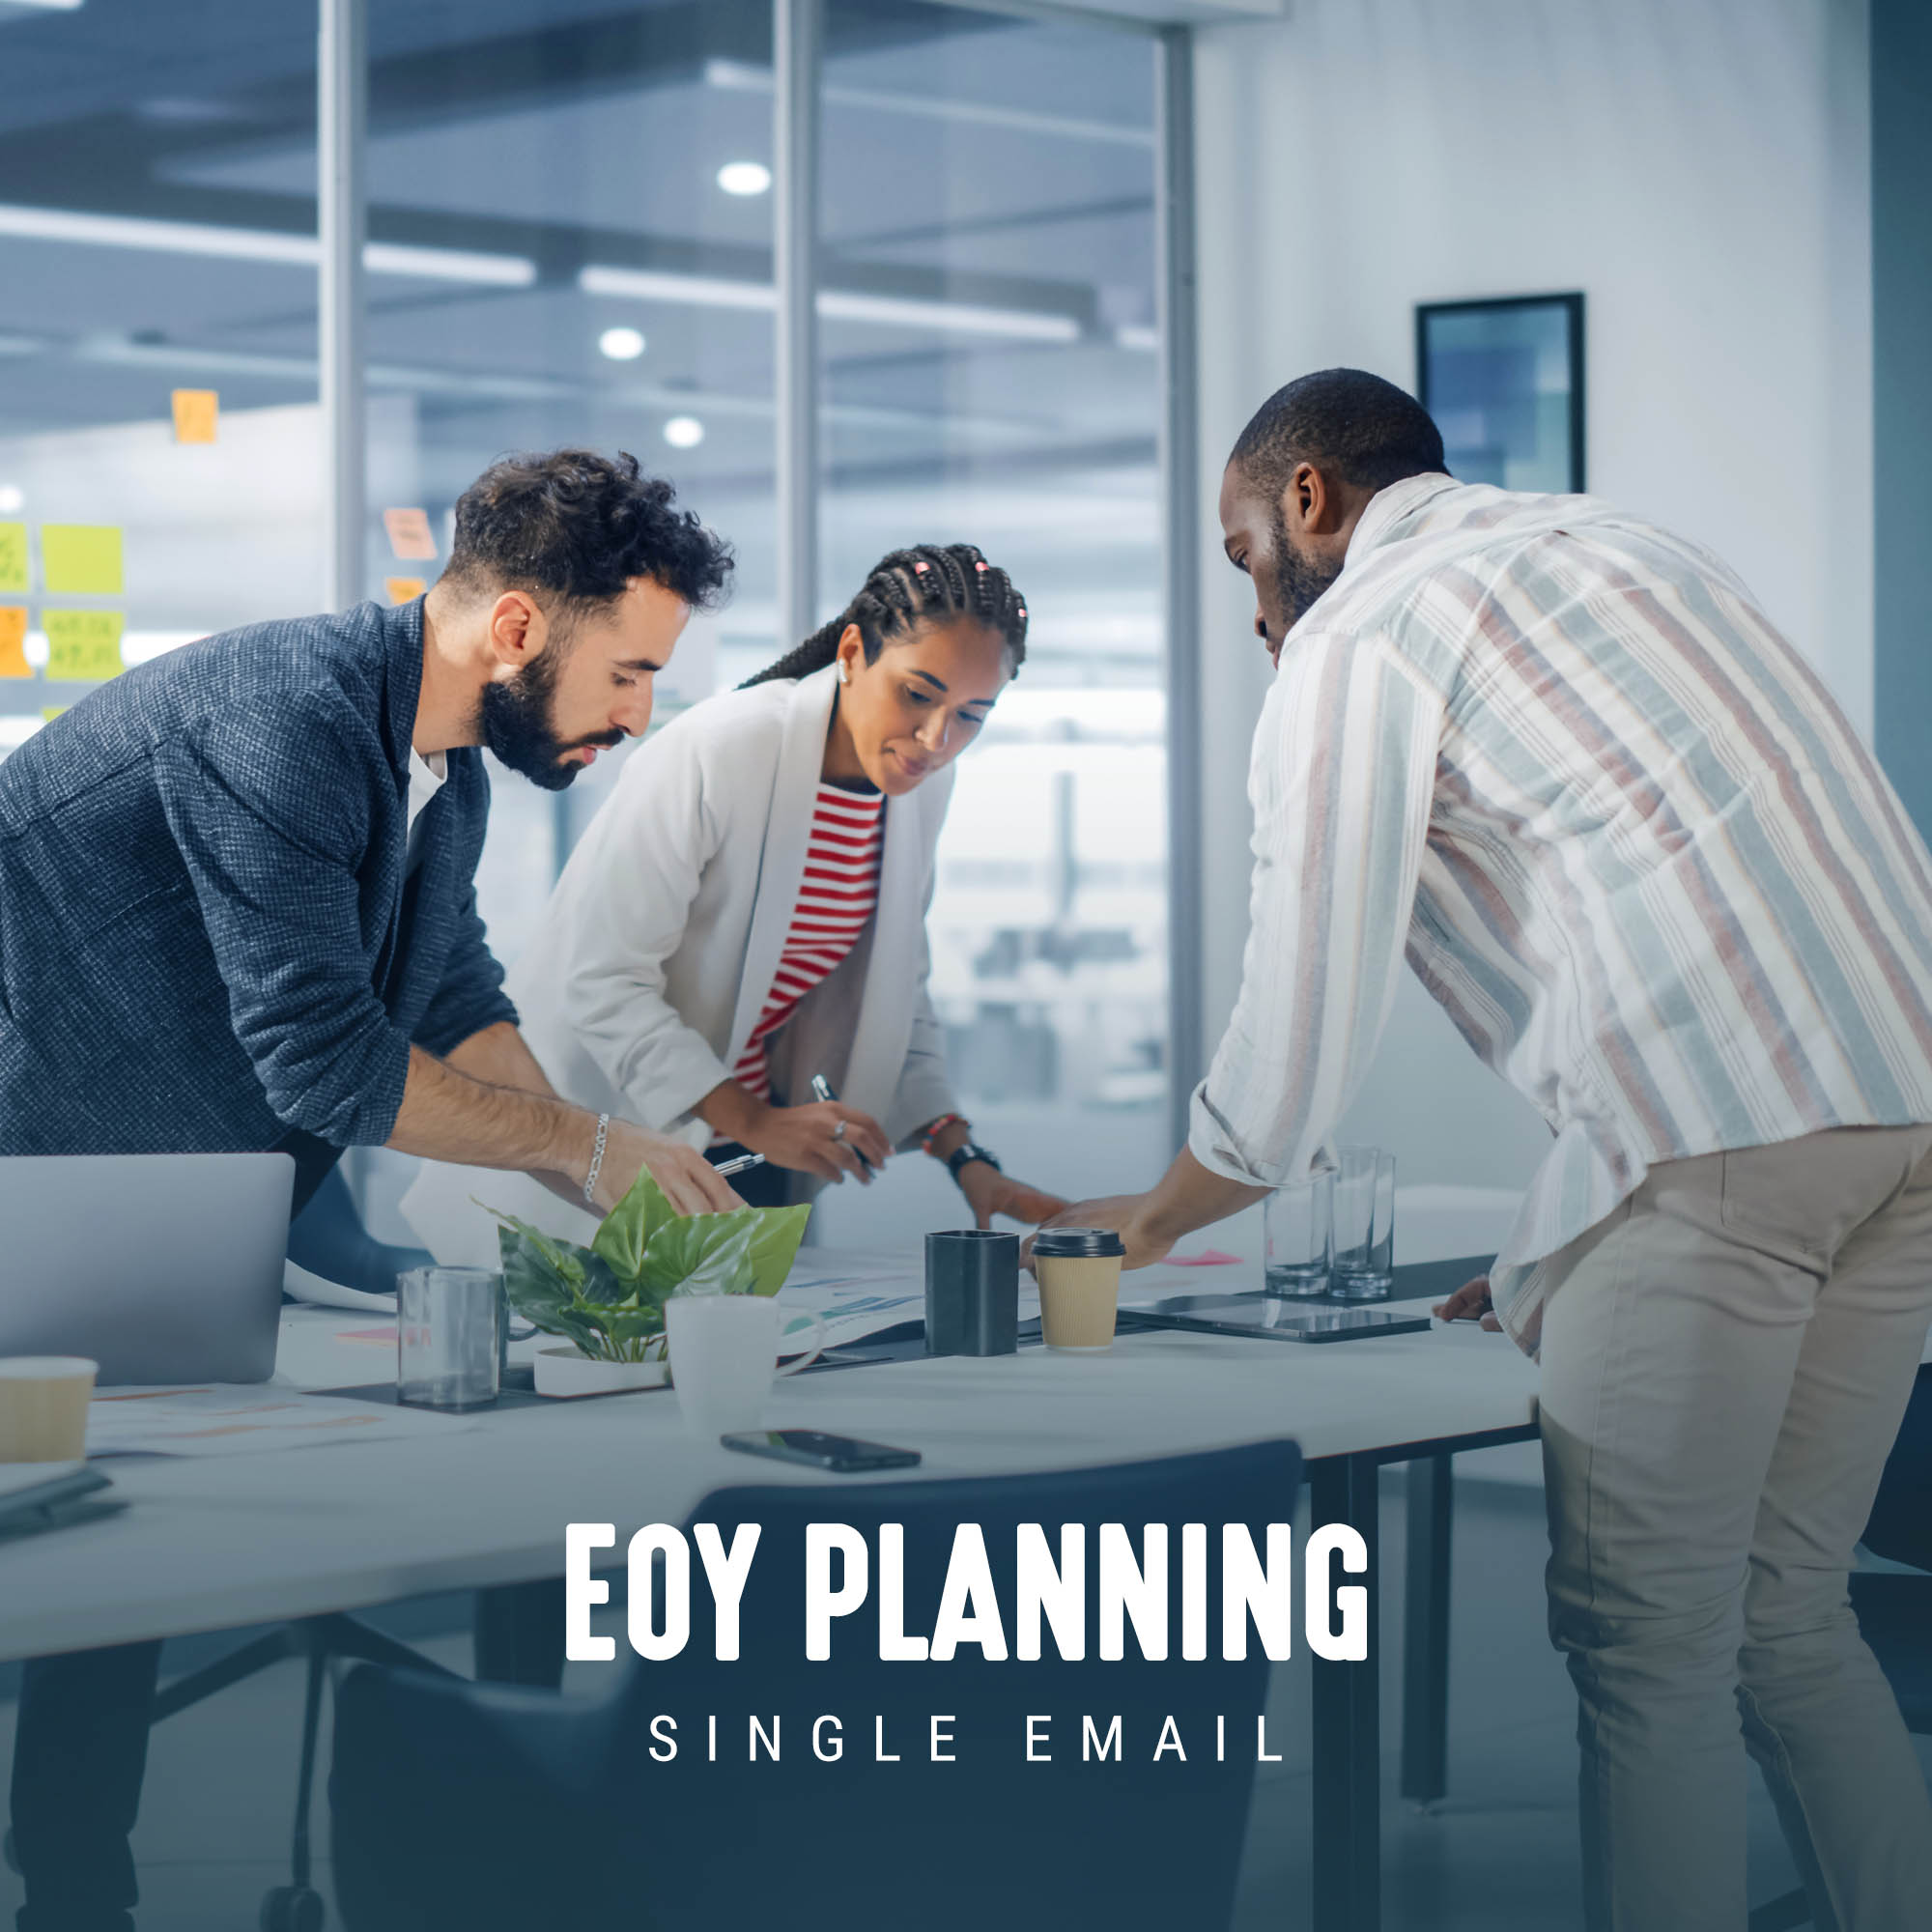 EOY Planning Email - (Created in partnership with fpPathfinder)